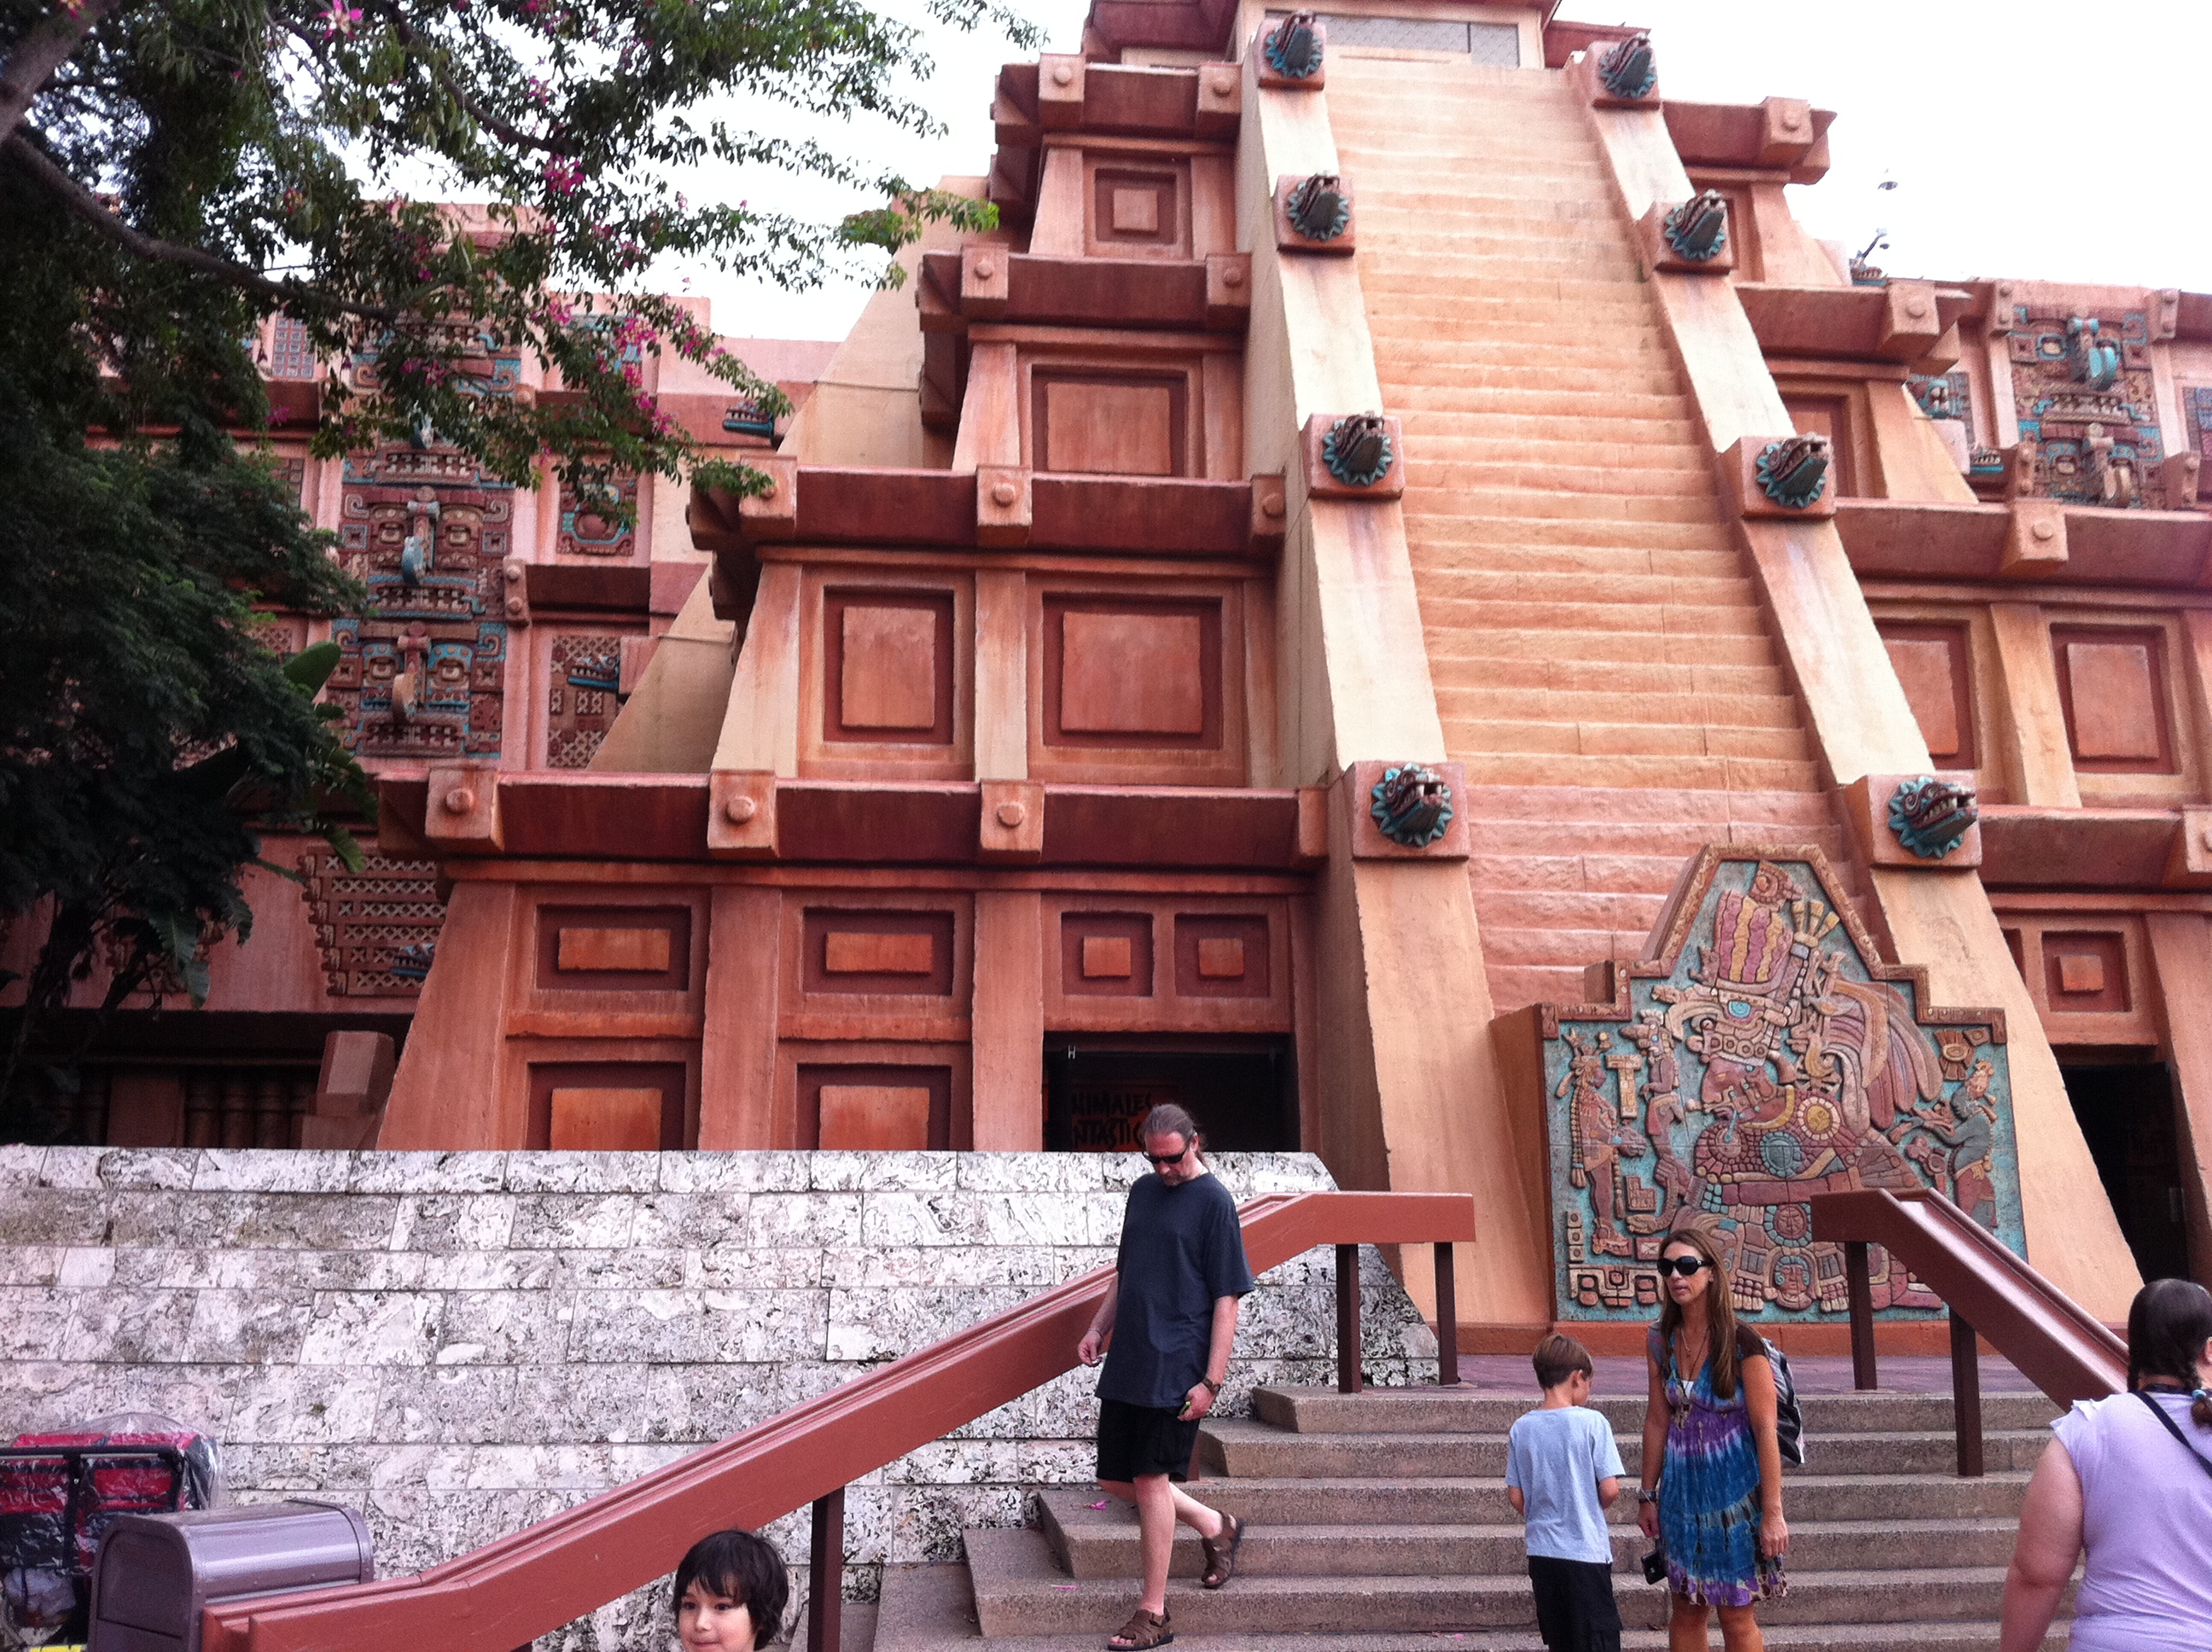 Lunch at the Mexican Restaurant in Epcot Was a Huge Disappointment